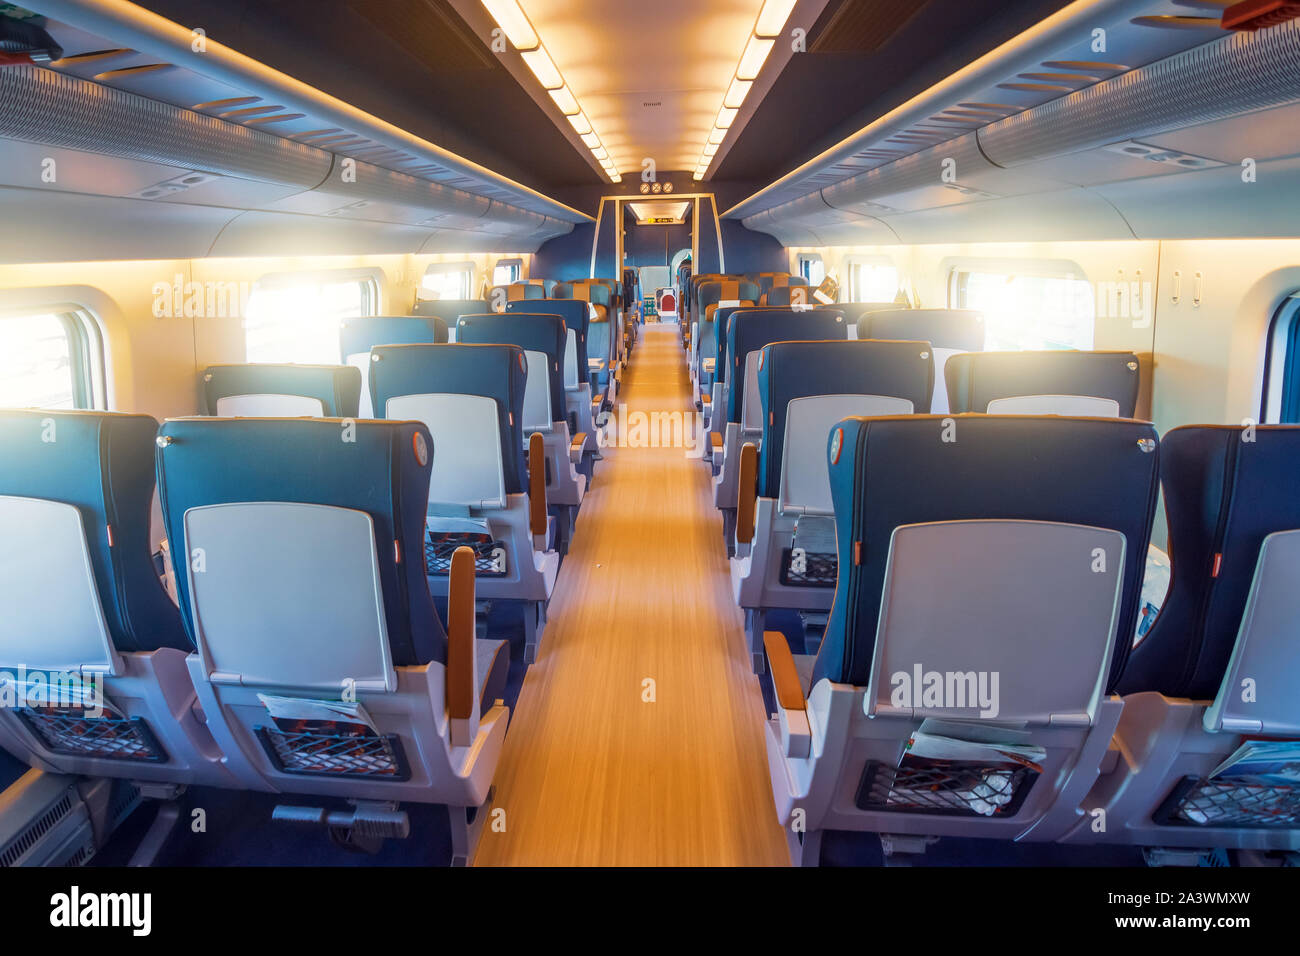 Passage in the car of a passenger high-speed train, view of the seats Stock Photo